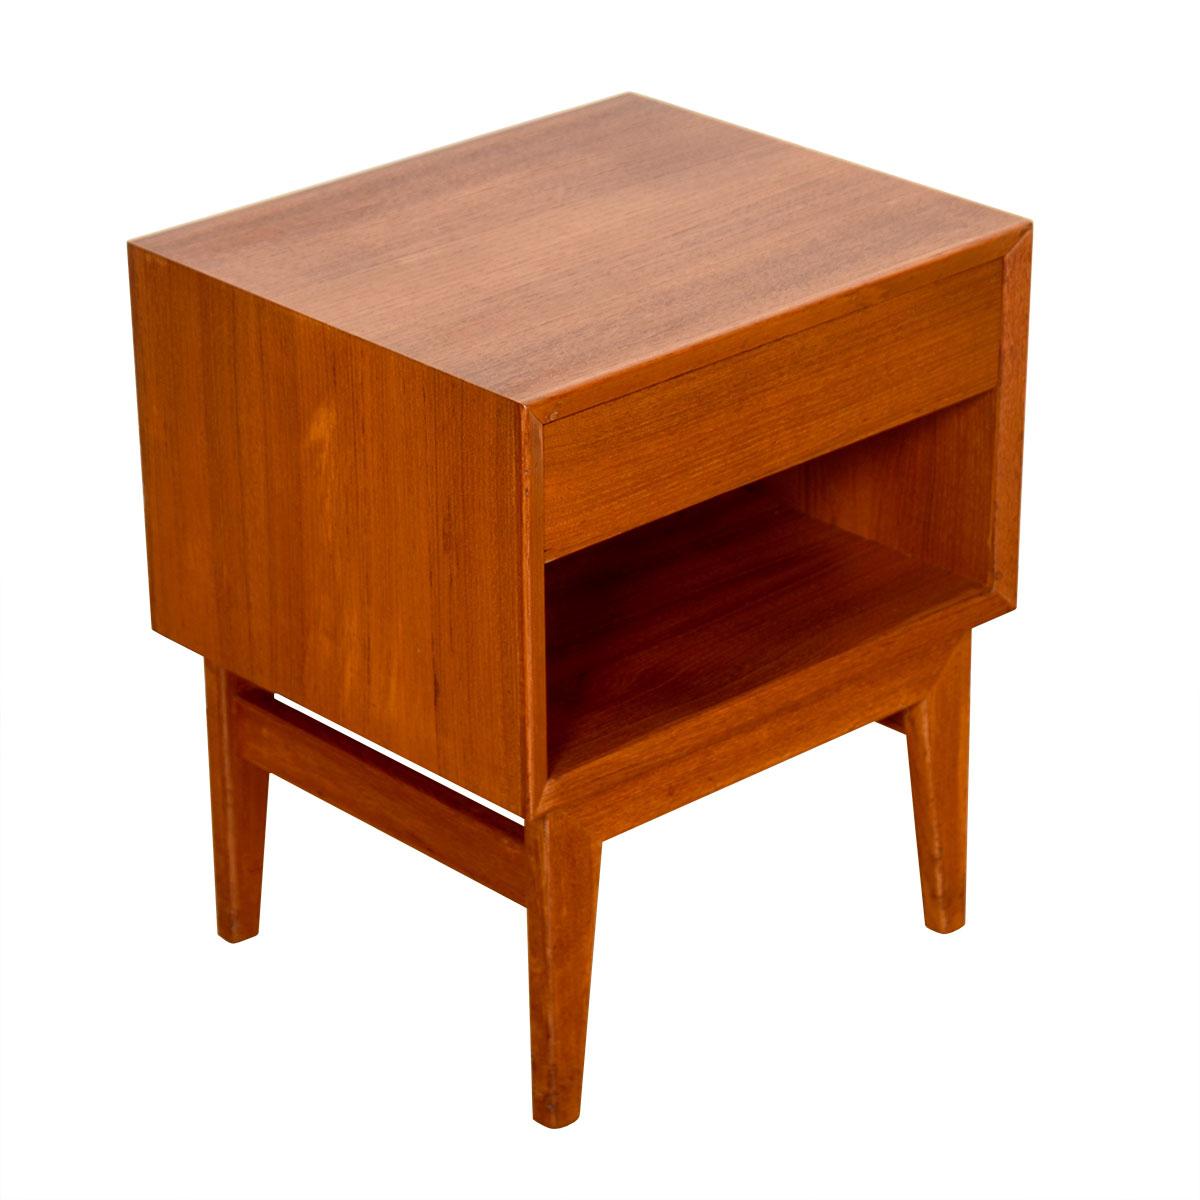 Pair of Danish Teak Nightstands End Tables with Finished Backsides

Additional Information:
Material: Teak
Featured at Kensington:
the search for the small nightstand is over!
Plenty of storage provided with the one drawer and cubby